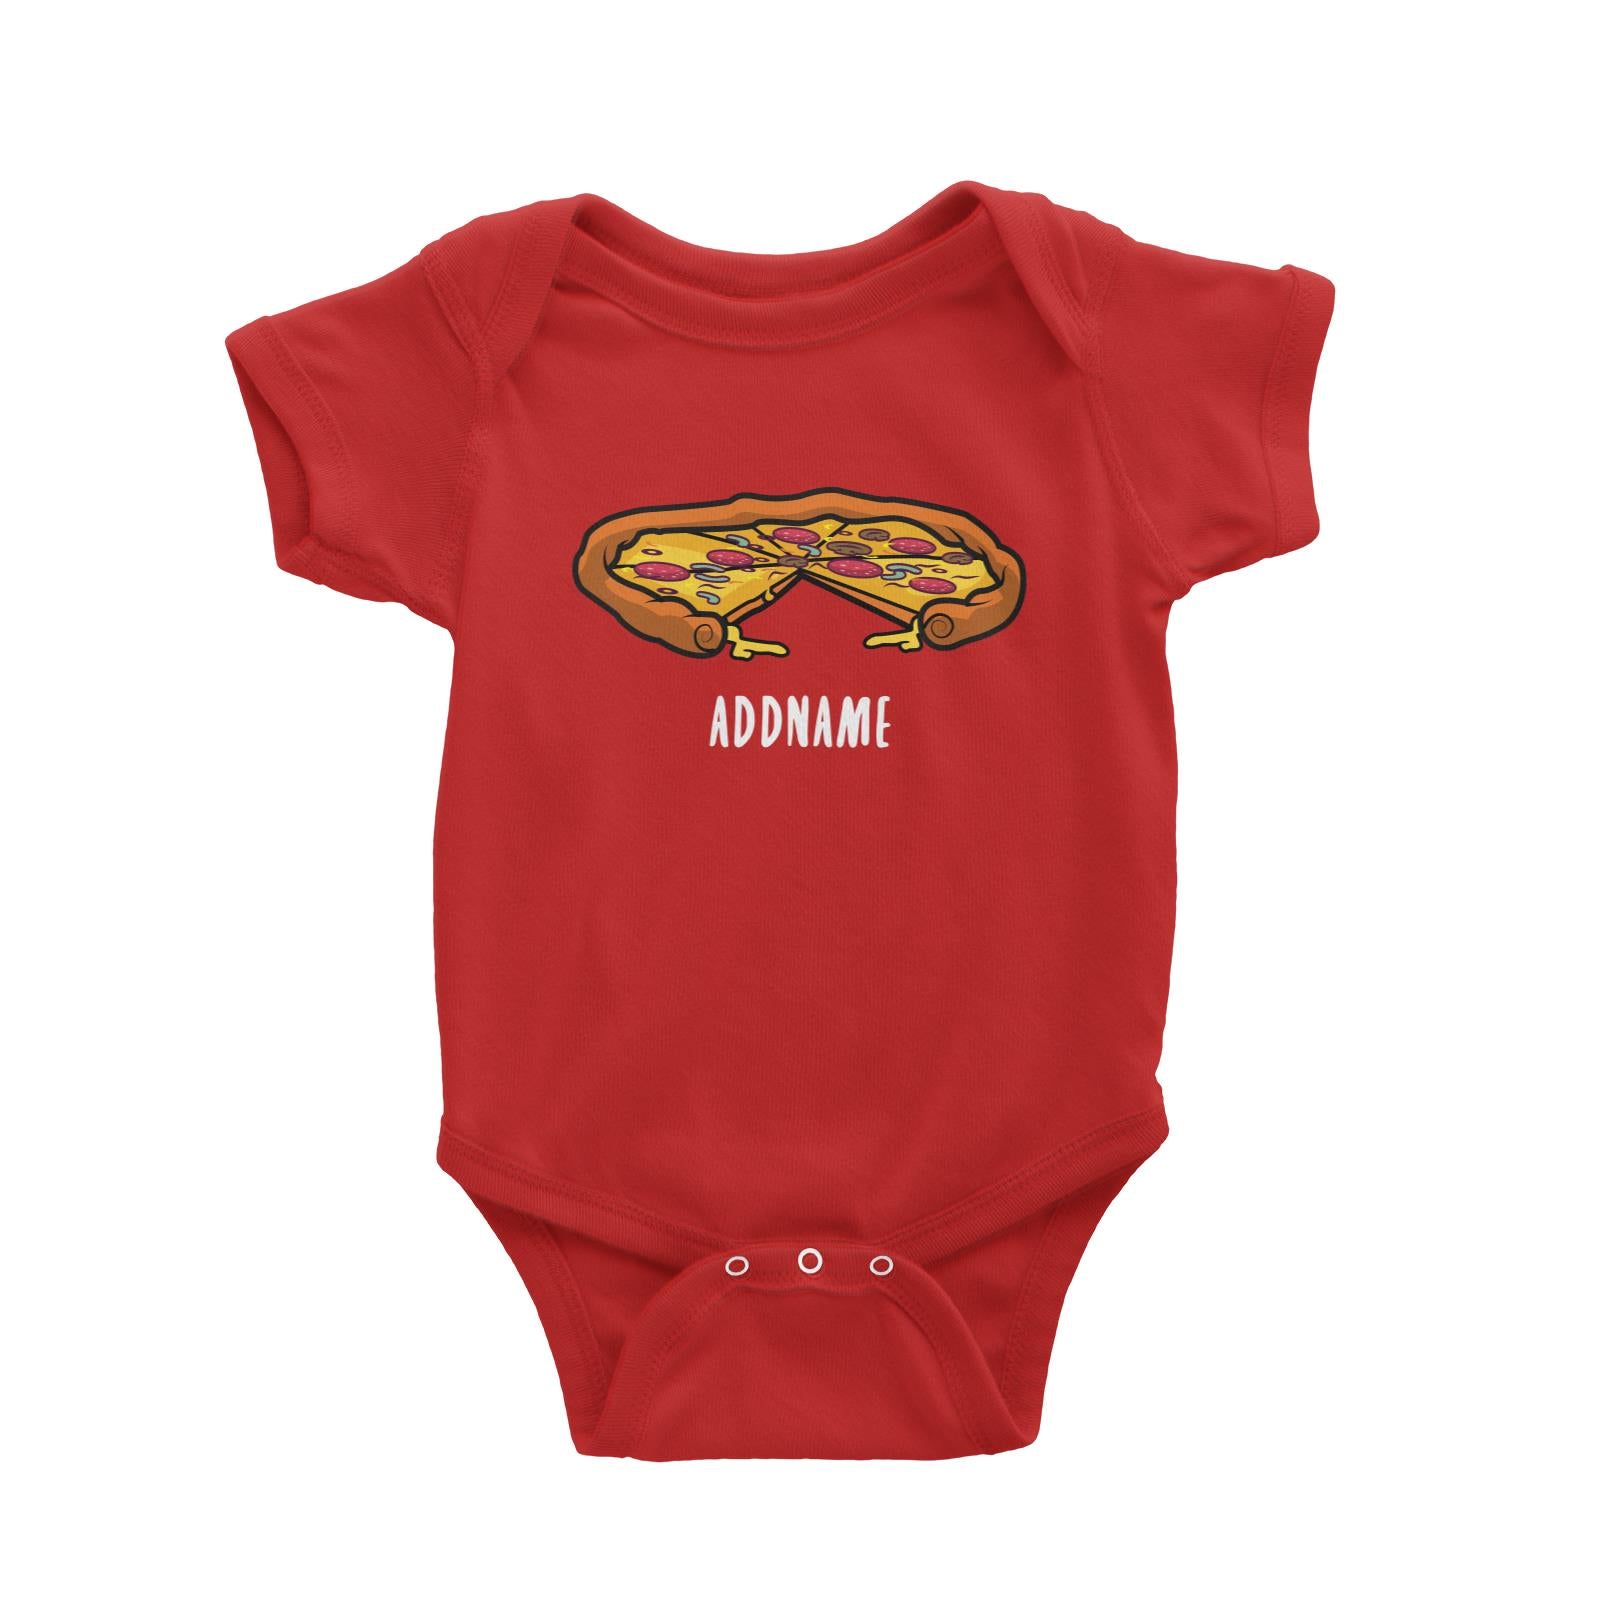 Fast Food Whole Pizza with A Slice Taken Out Addname Baby Romper  Matching Family Comic Cartoon Personalizable Designs